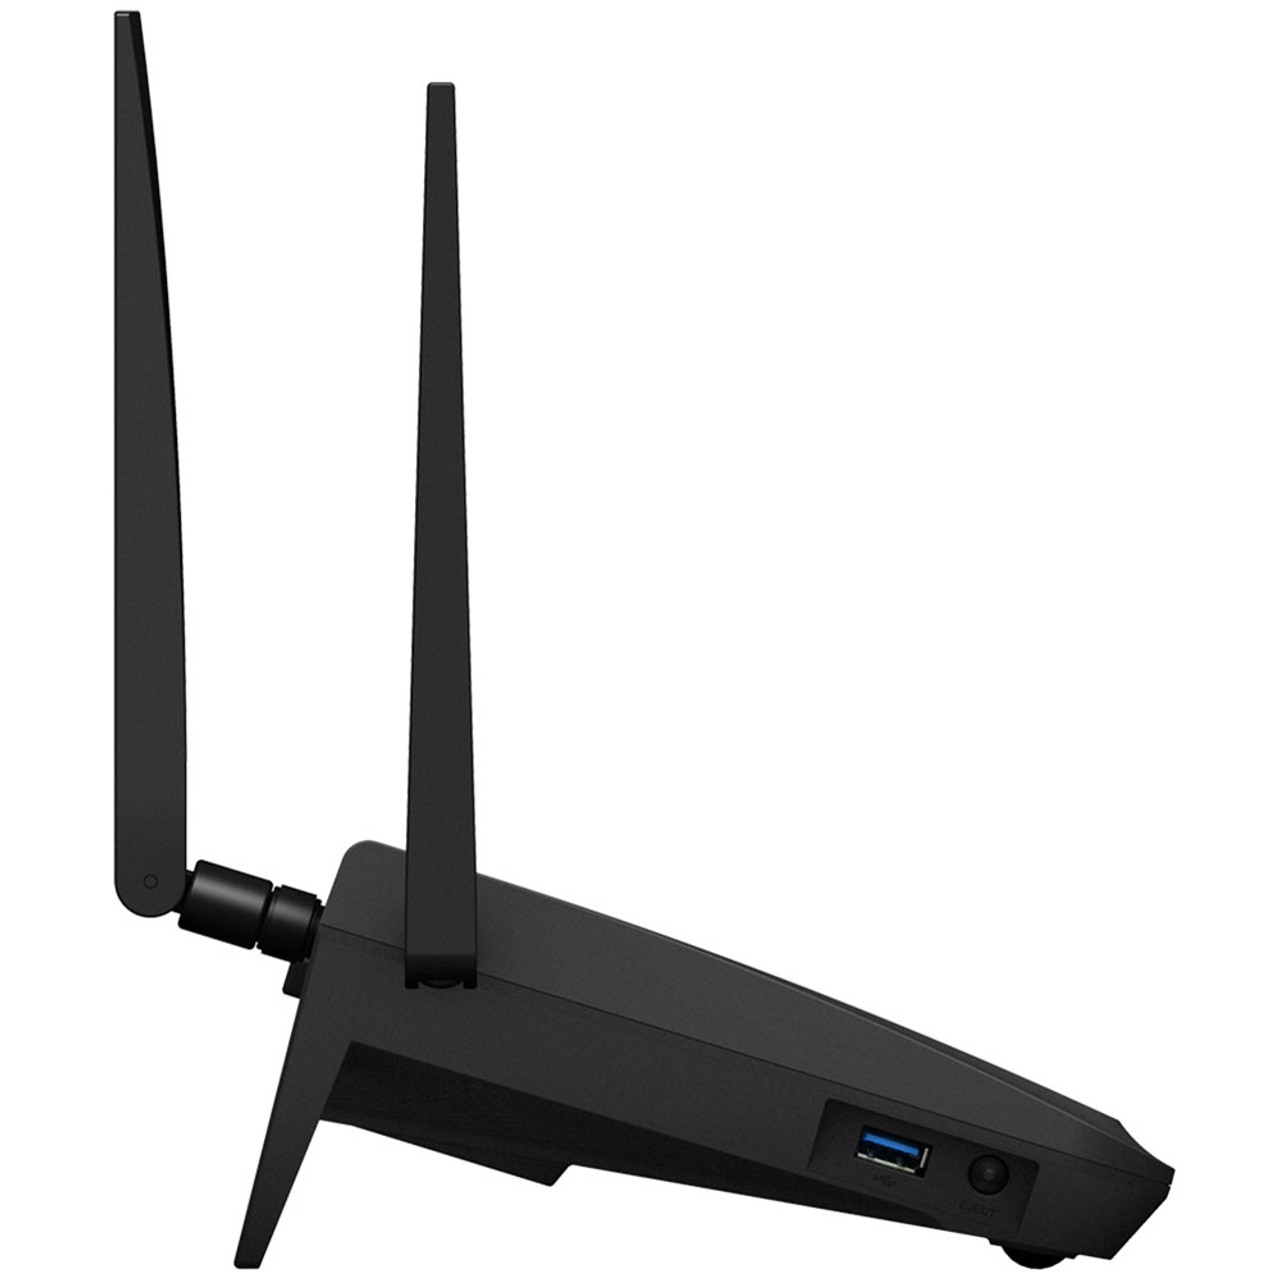 Synology RT2600ac Dual WAN Wireless Router